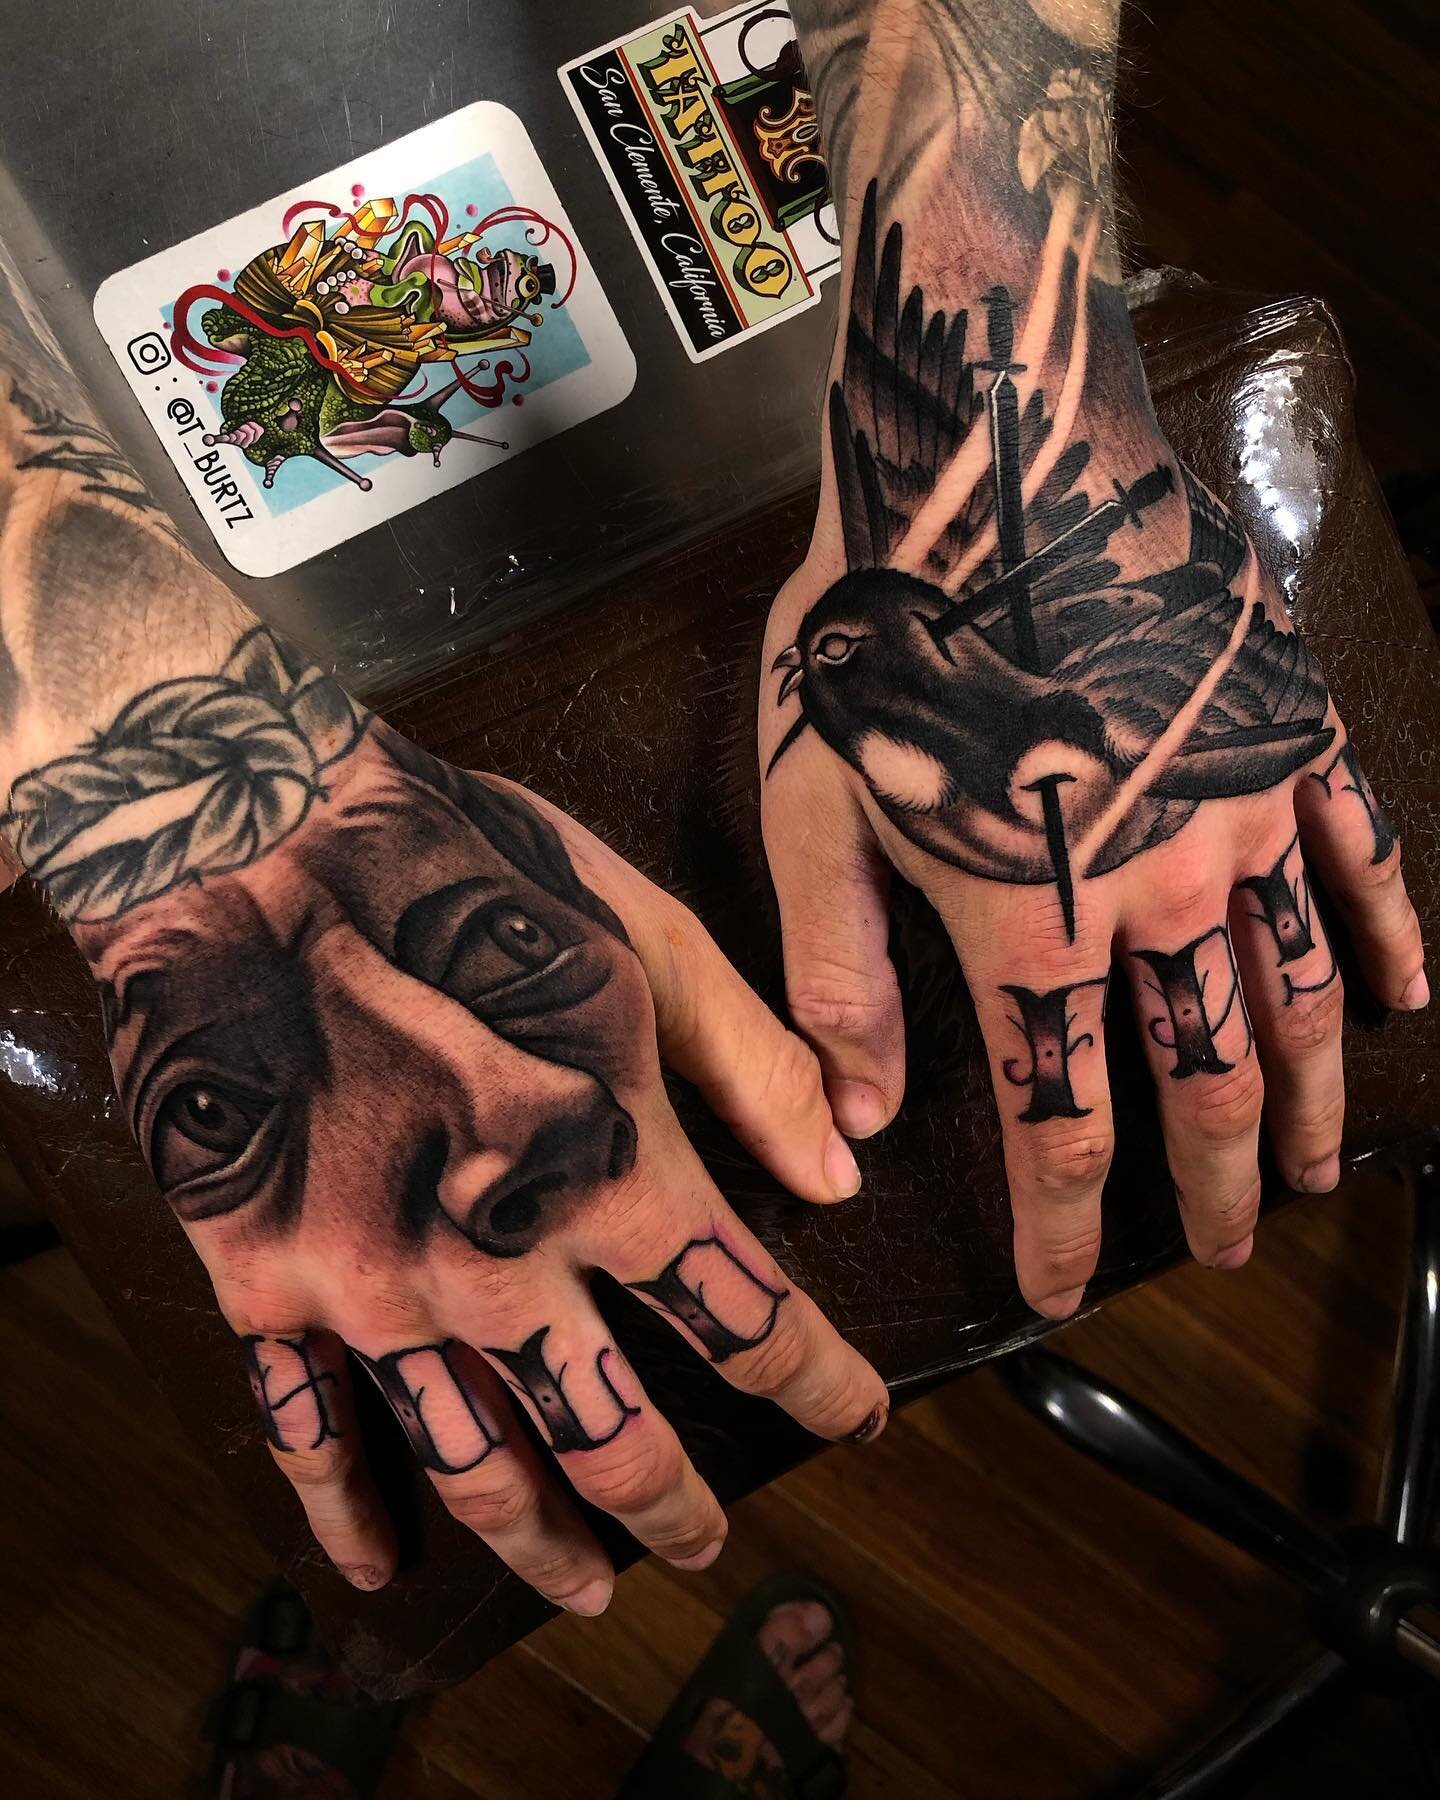 Pair of hands I did recently, including &ldquo;hold fast&rdquo; on the knuckles all in one session. Thanks again, Eli 👊🏼
&bull;
To book an appointment, hit the link in my bio 🎉 or email me directly to t_burtz@yahoo.com
&bull;
&bull;
&bull;
&bull;
